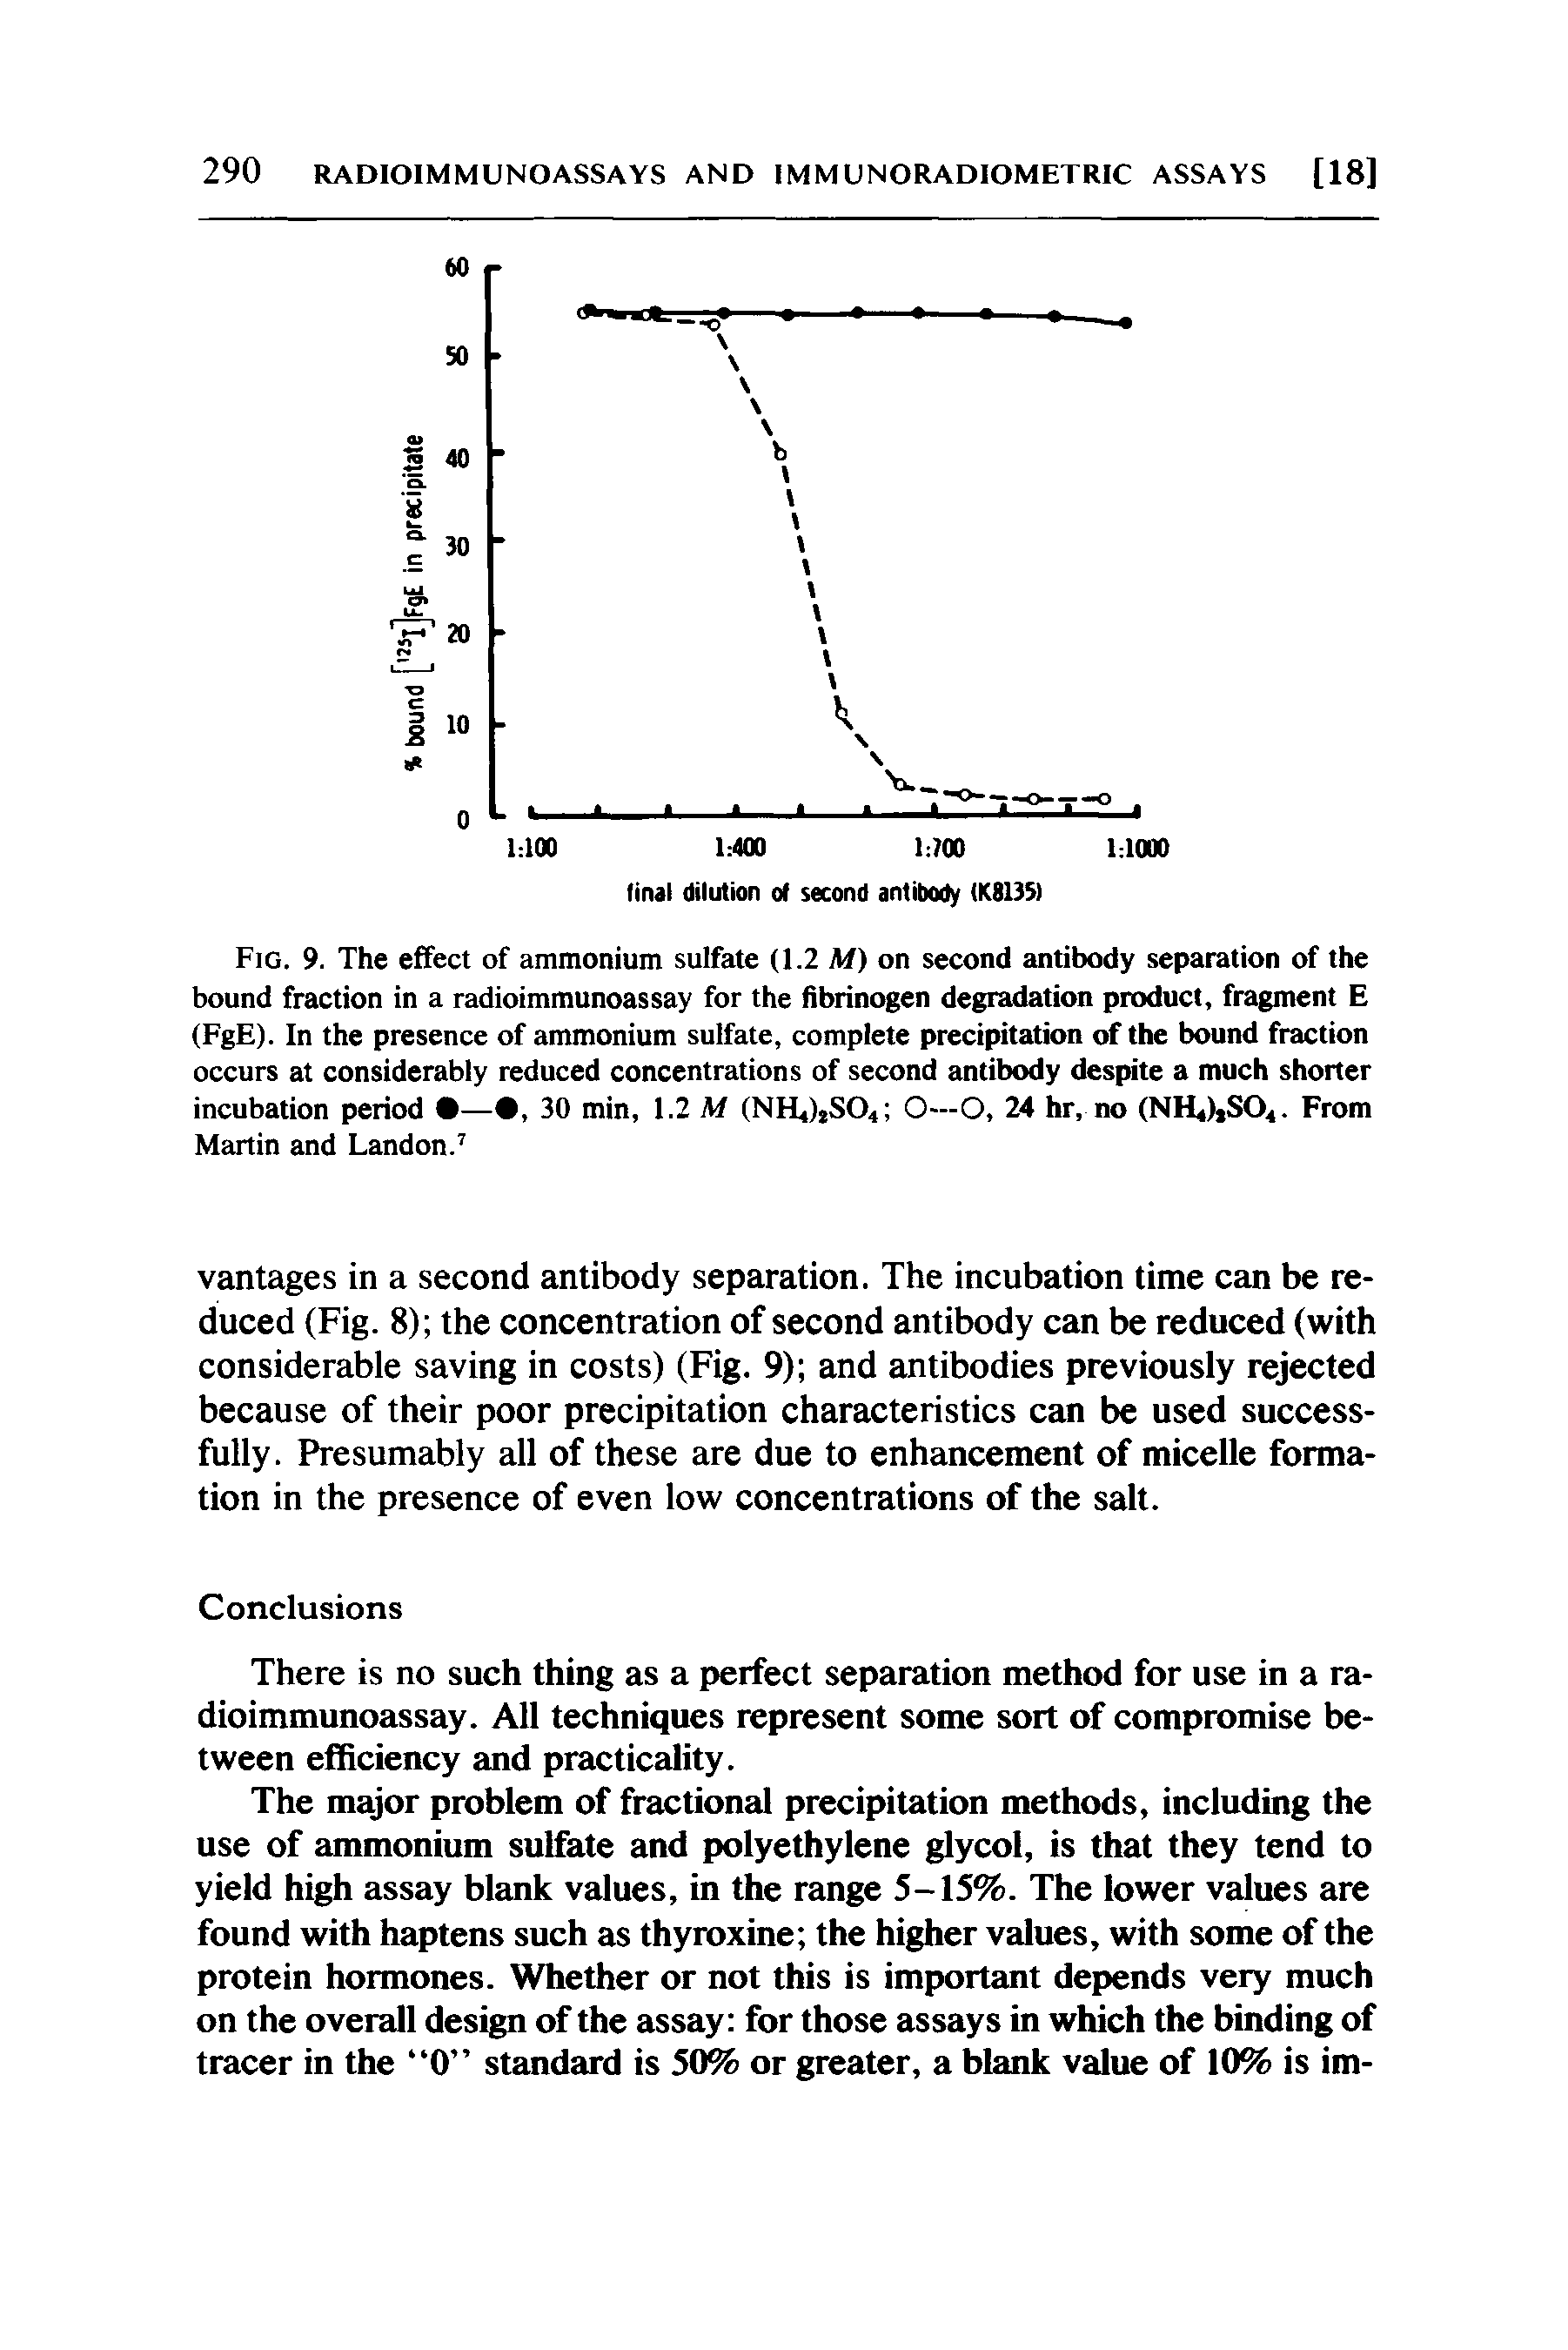 Fig. 9. The effect of ammonium sulfate (1.2 M) on second antibody separation of the bound fraction in a radioimmunoassay for the fibrinogen degradation product, fragment E (FgE). In the presence of ammonium sulfate, complete precipitation of the bound fraction occurs at considerably reduced concentrations of second antibody despite a much shorter incubation period — , 30 min, 1.2 M (NHiljSOi O—O, 24 hr, no (NH4>jS04. From Martin and Landon. ...